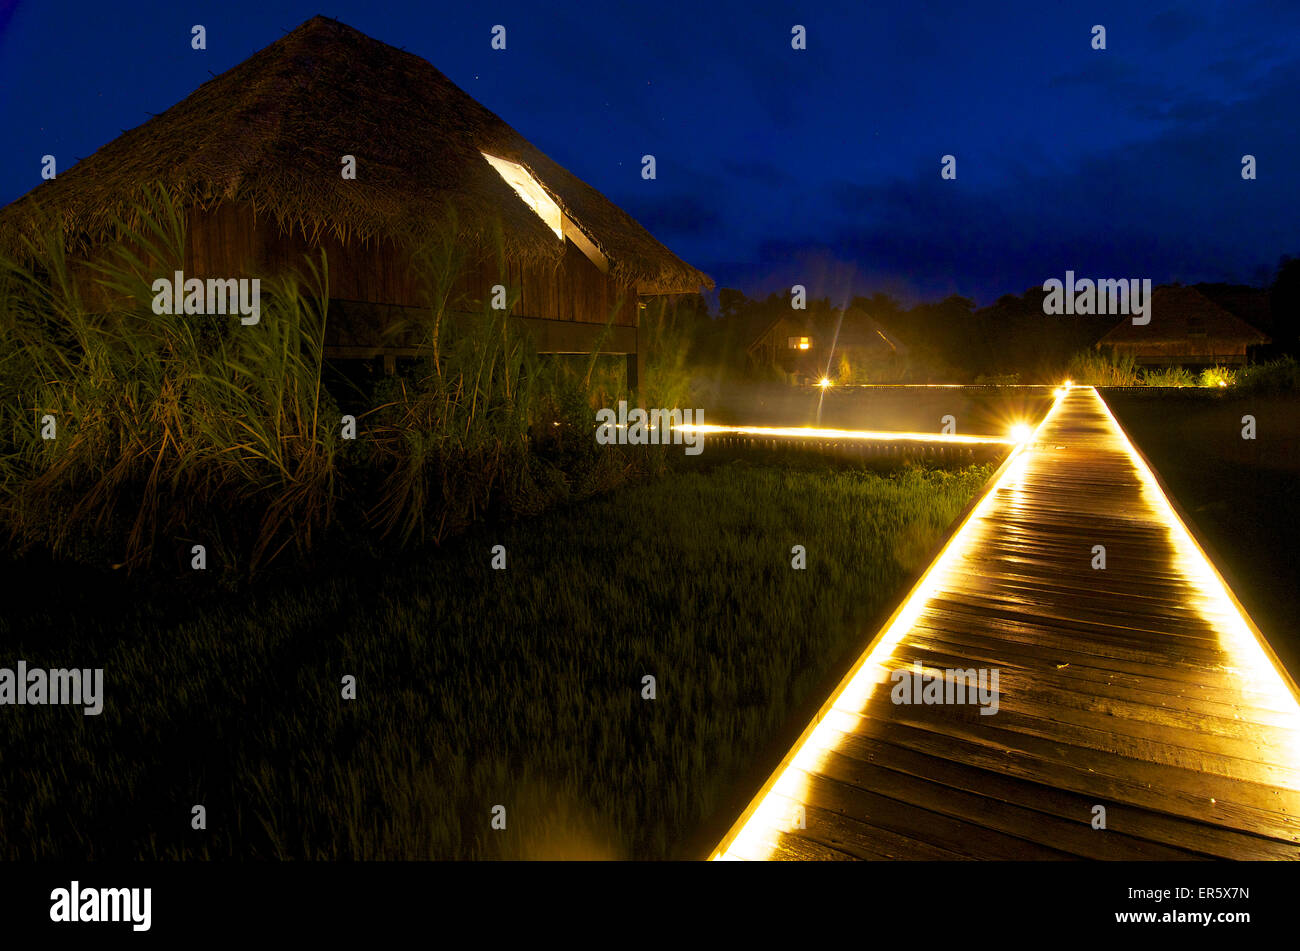 Wooden gangway with lights at dusk and bungalows on stilts standing in rice paddies, Jetwing Hotel Vil Uyana, Sigiriya, Matale D Stock Photo